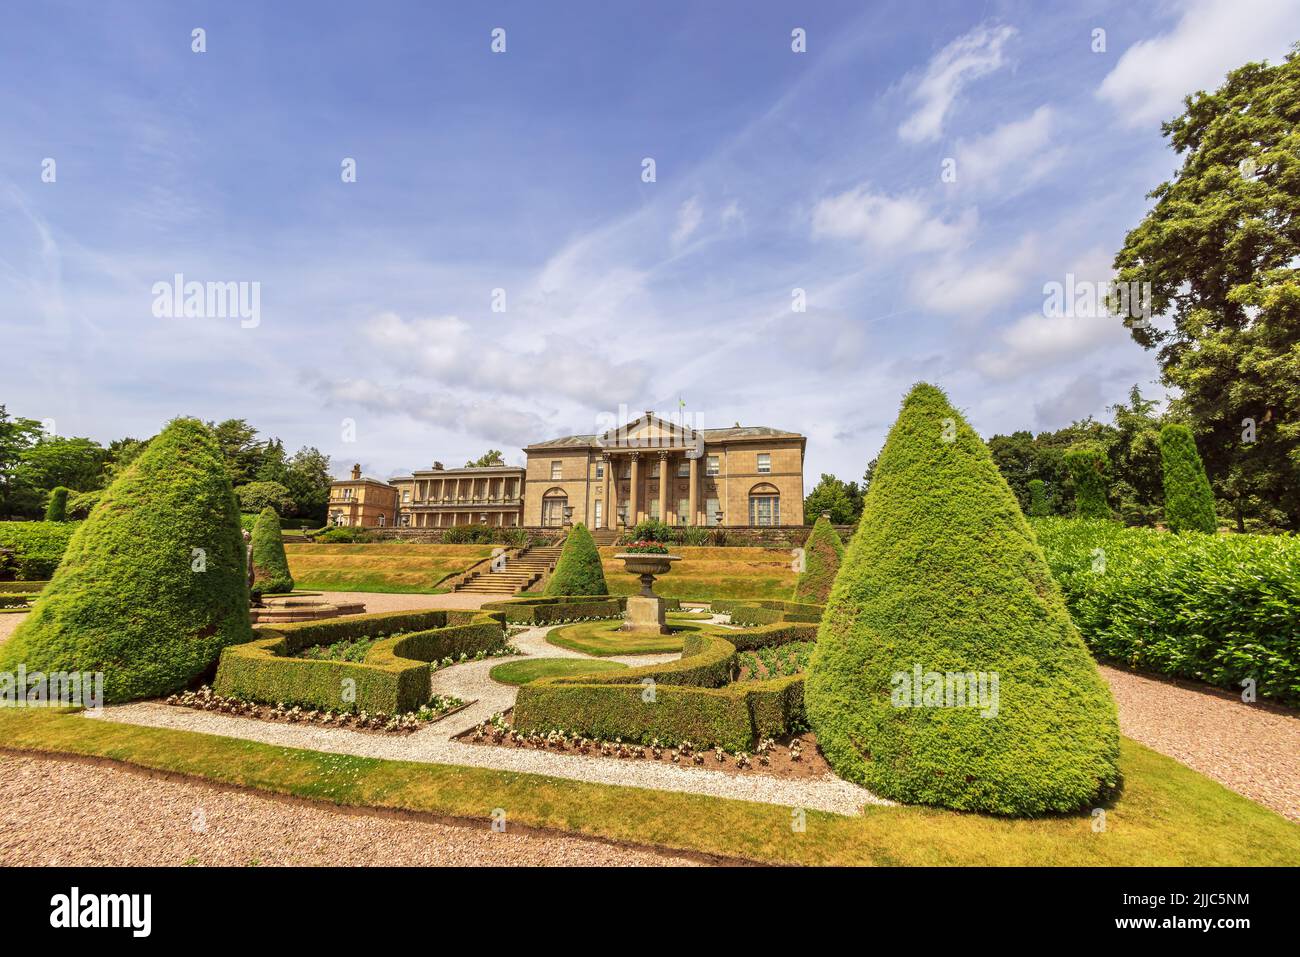 Park and parterre garden at historic Tatton Park, English Stately Home in Cheshire, UK. Stock Photo